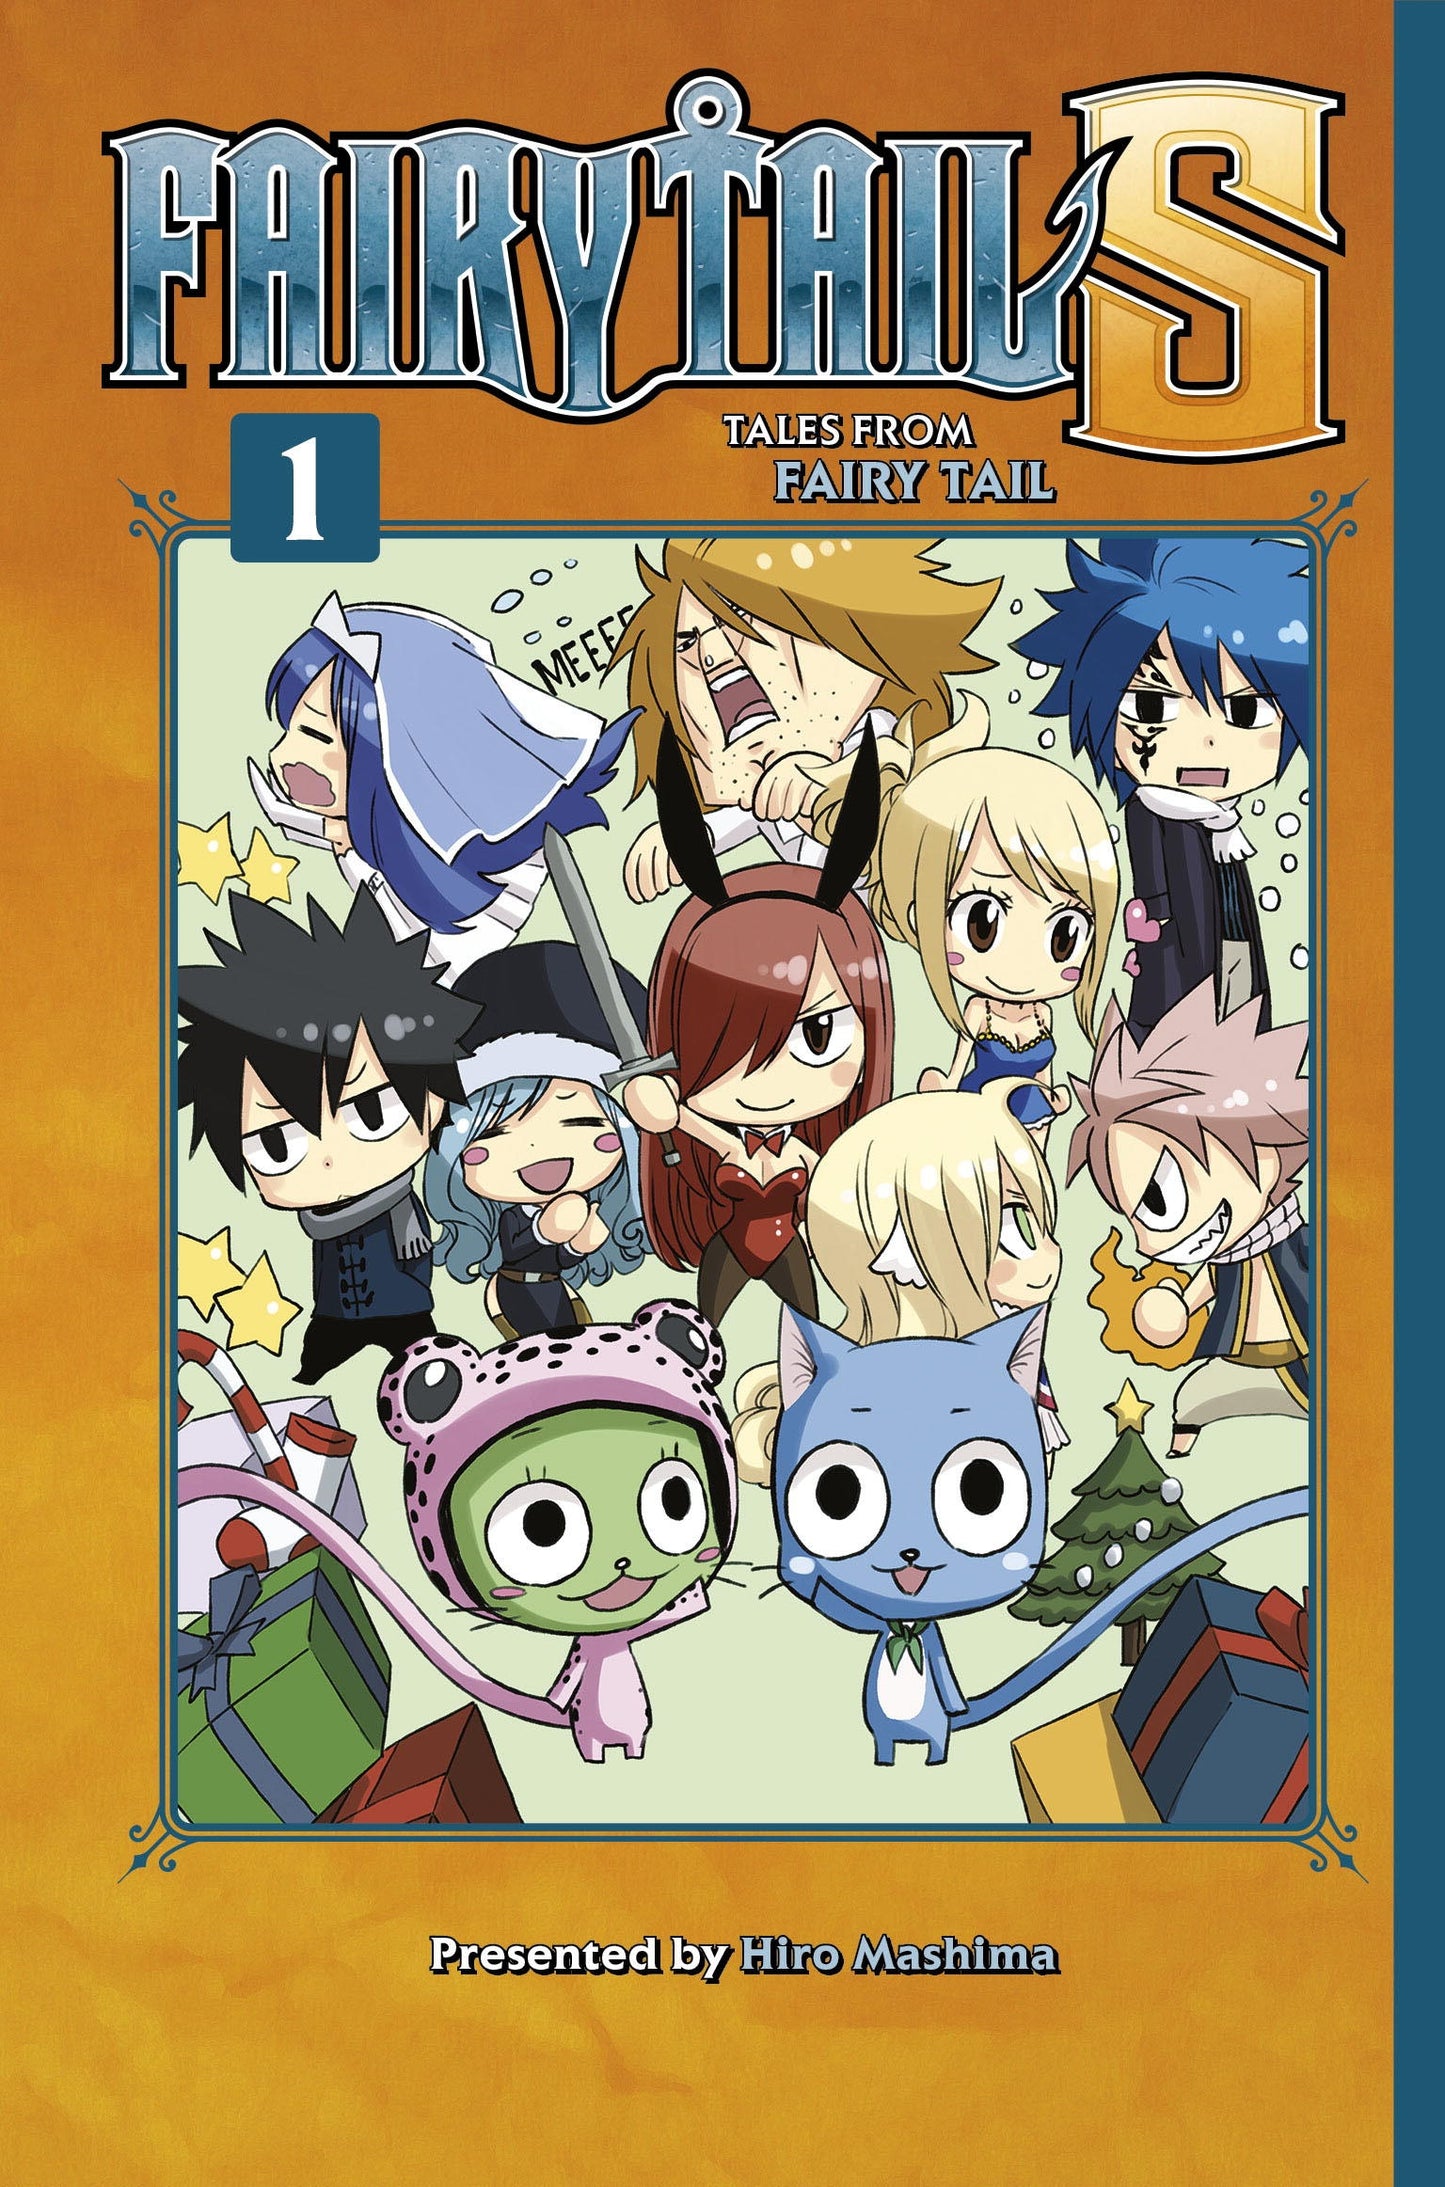 Fairy Tail S Volume 1 Tales From Fairy Tail - Manga Warehouse